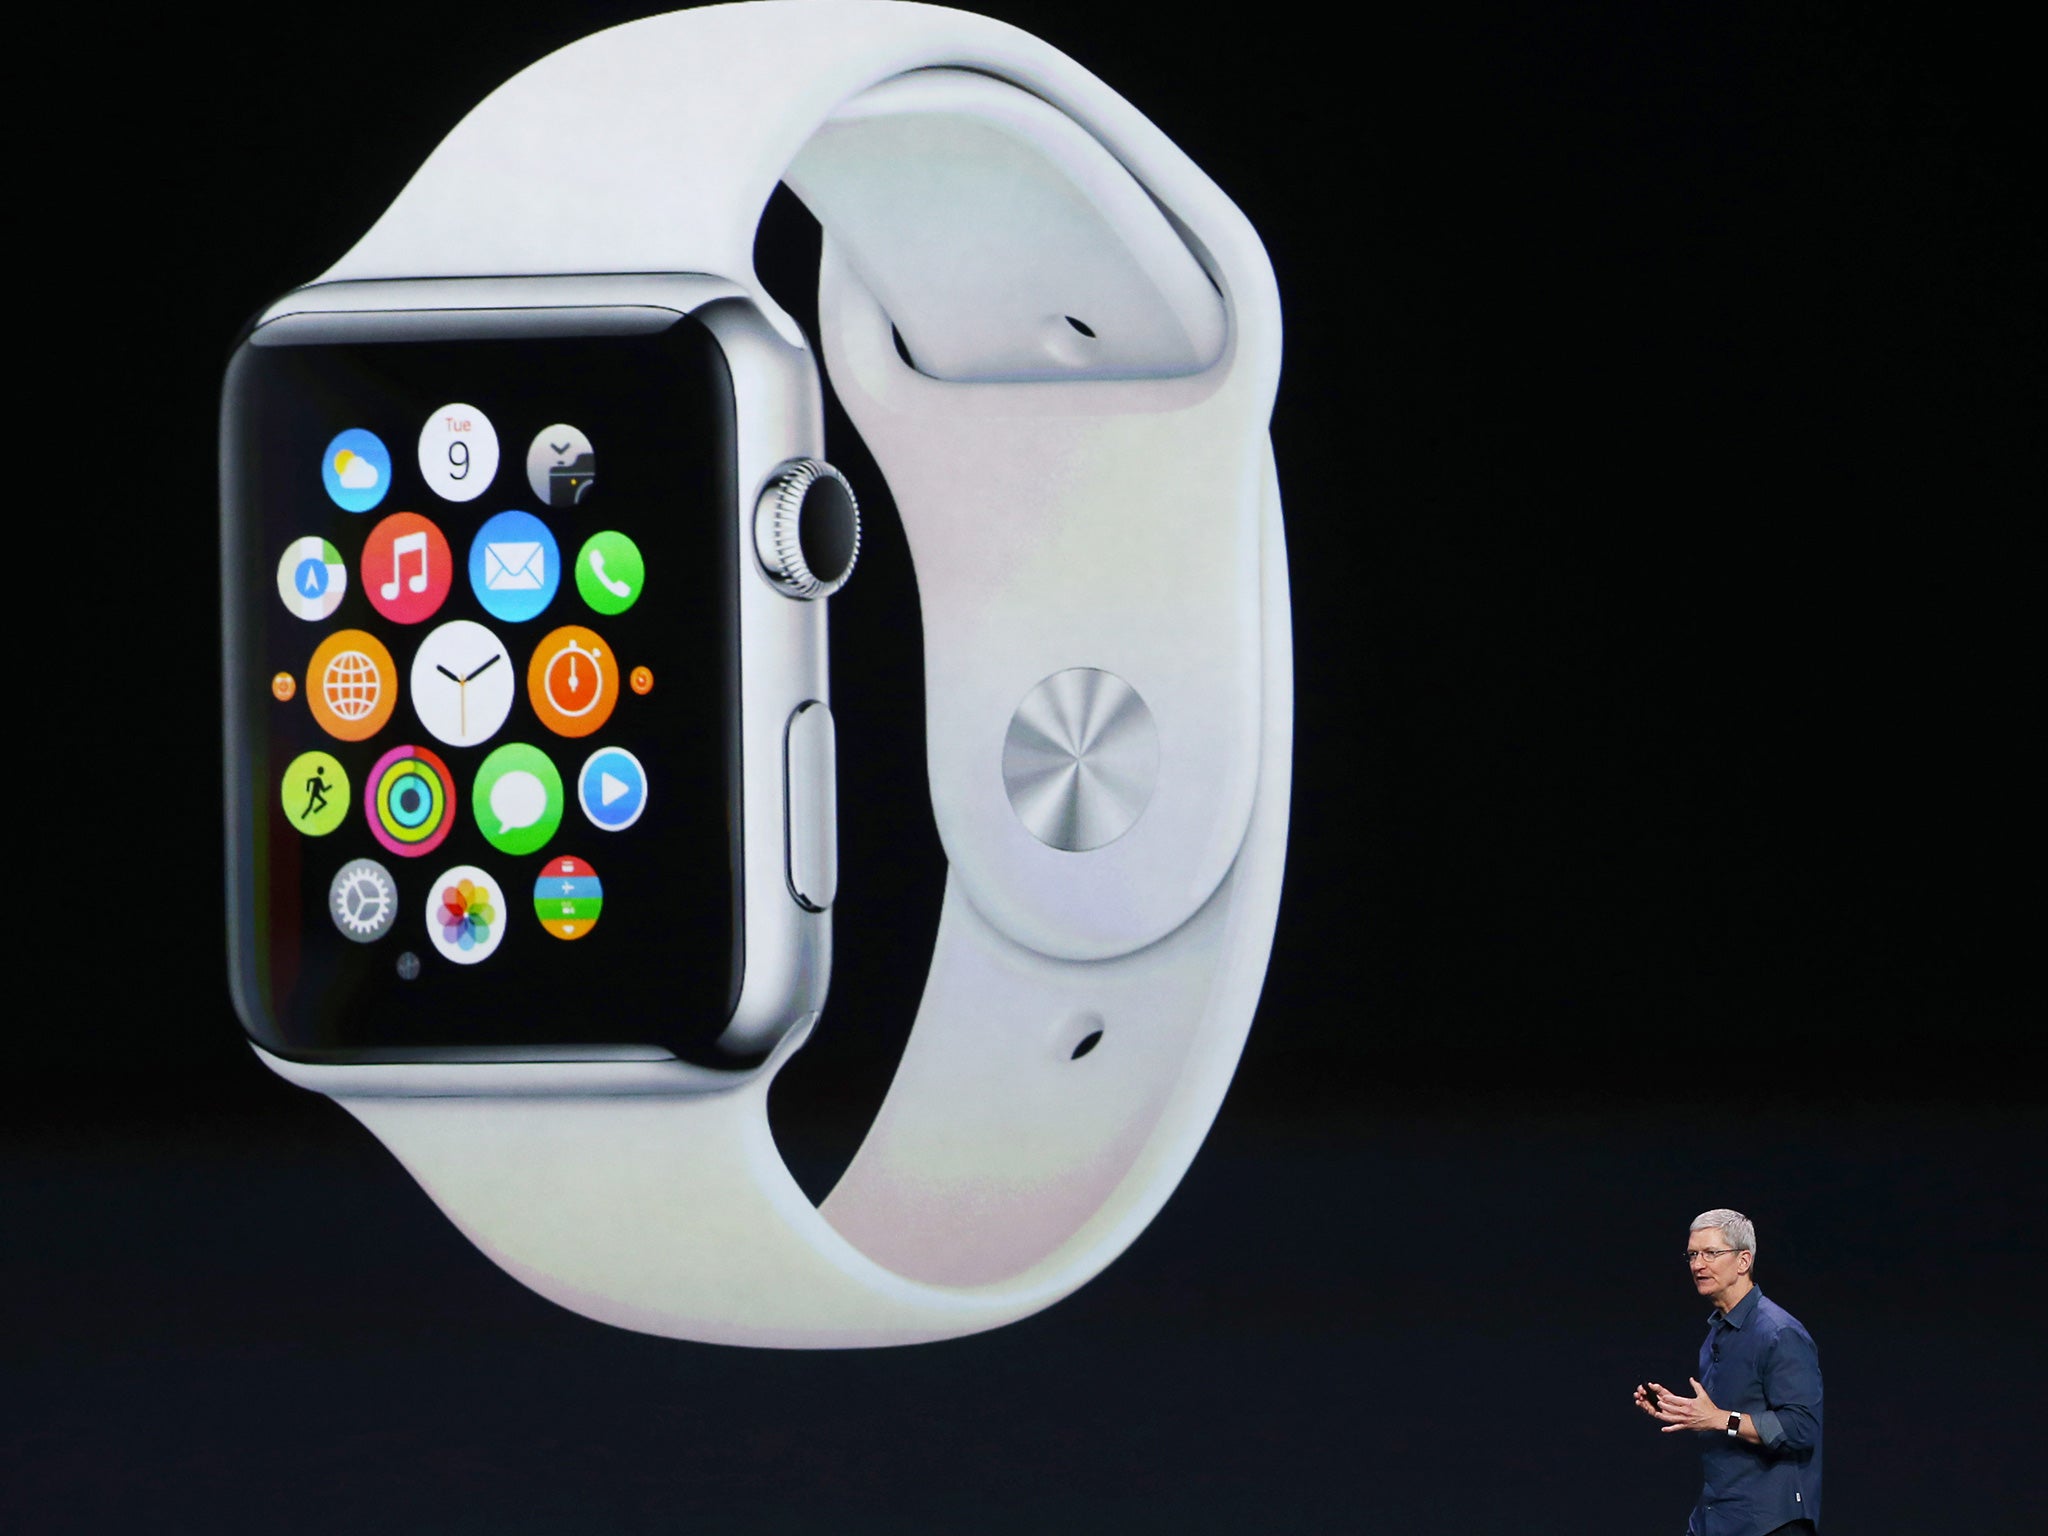 The Apple Watch already uses OLED screens, and the operating system makes heavy use of the improved blacks